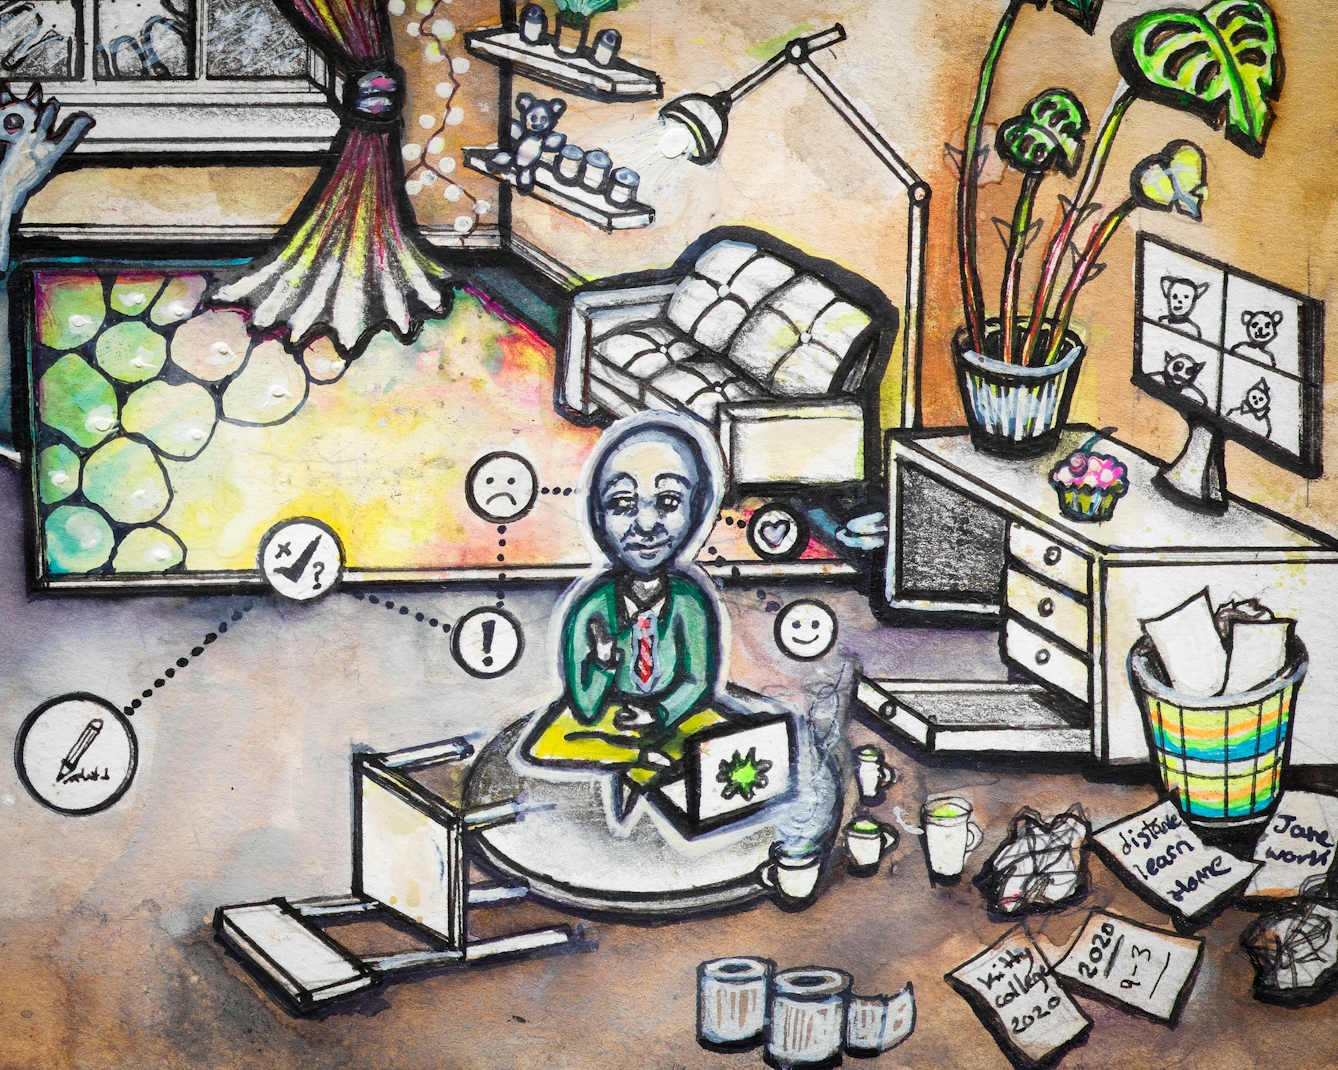 Artwork using watercolour and ink incorporating some collaged words. The artwork shows a busy multi-coloured living room scene in which a small man wearing a tie sits in lotus position in front of a laptop surrounded by cups of tea, crumpled paper, and a chair on its side. Above his head are symbols in circles such as a check mark, a pencil, and a smiley face joined by dotted lines.